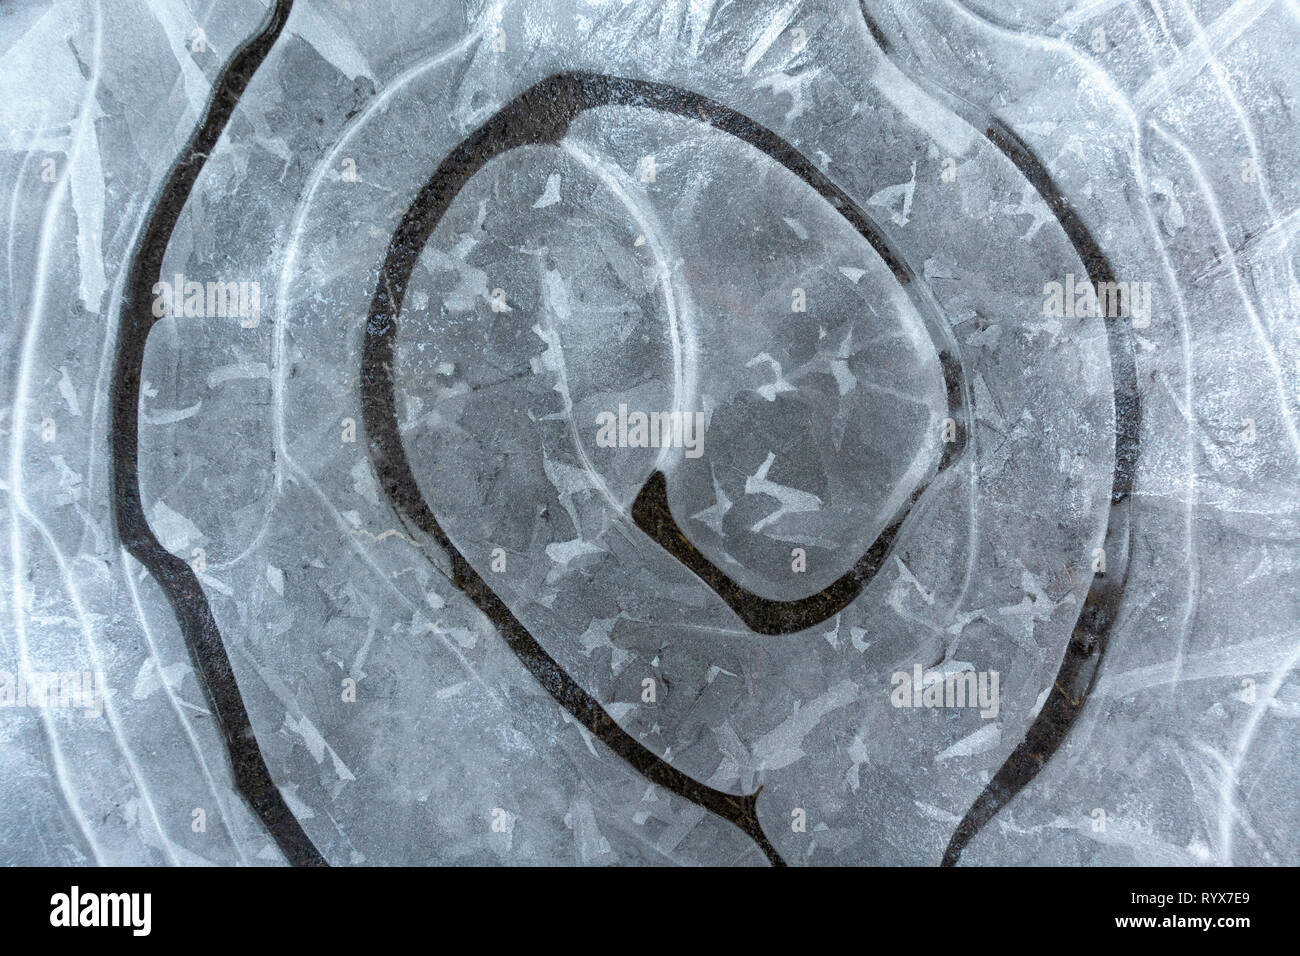 Abstract pattern of a frozen puddle Stock Photo